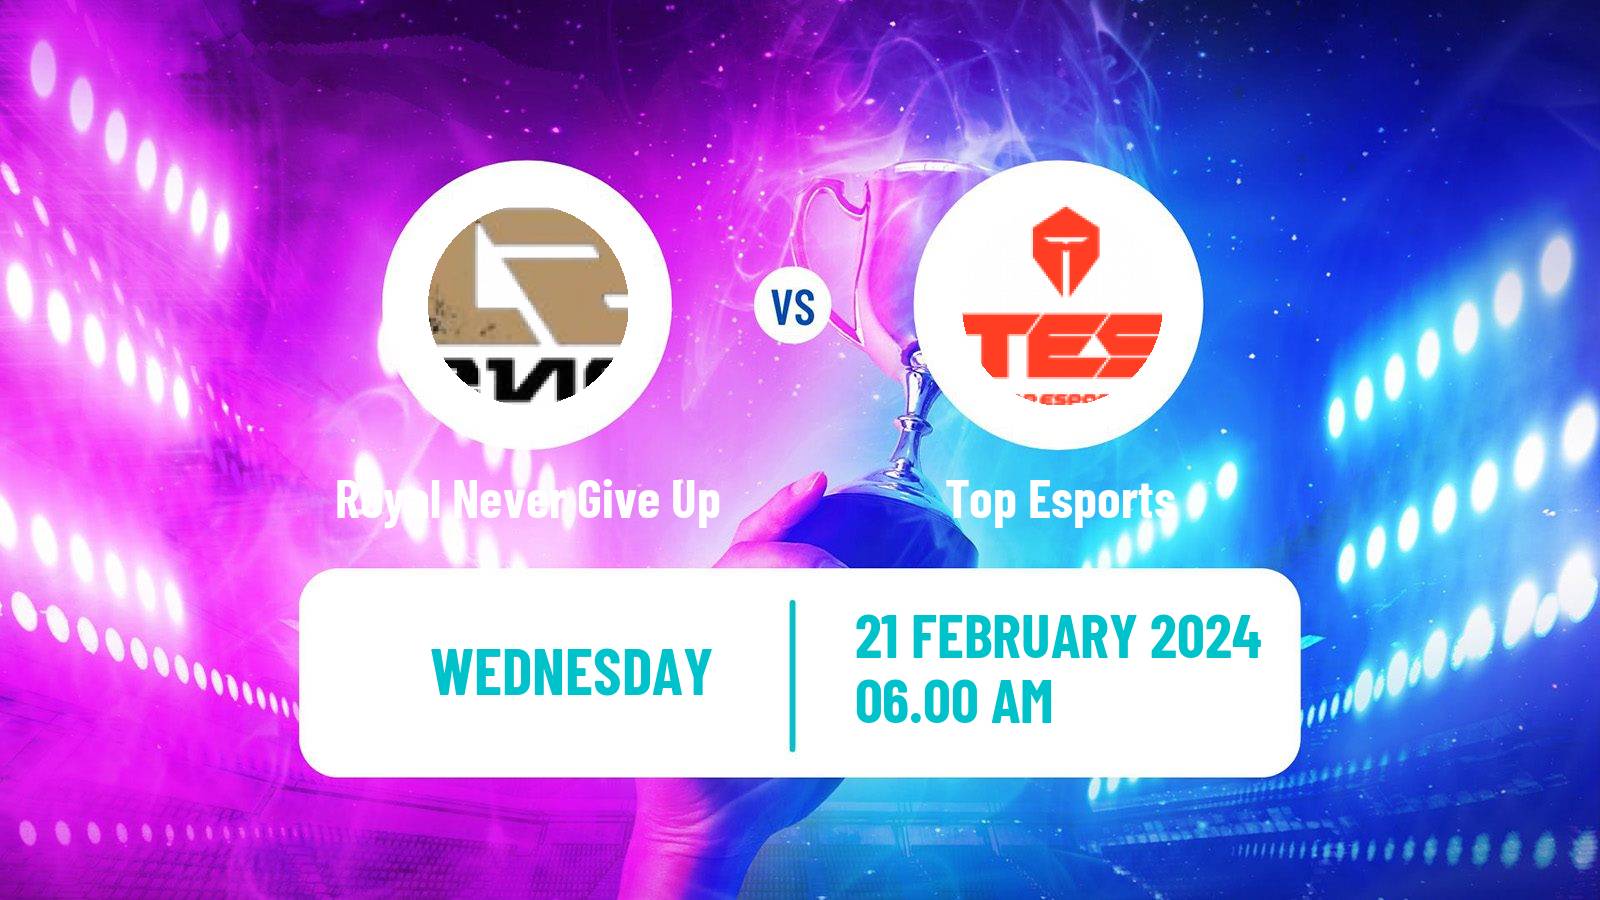 Esports League Of Legends Lpl Royal Never Give Up - Top Esports